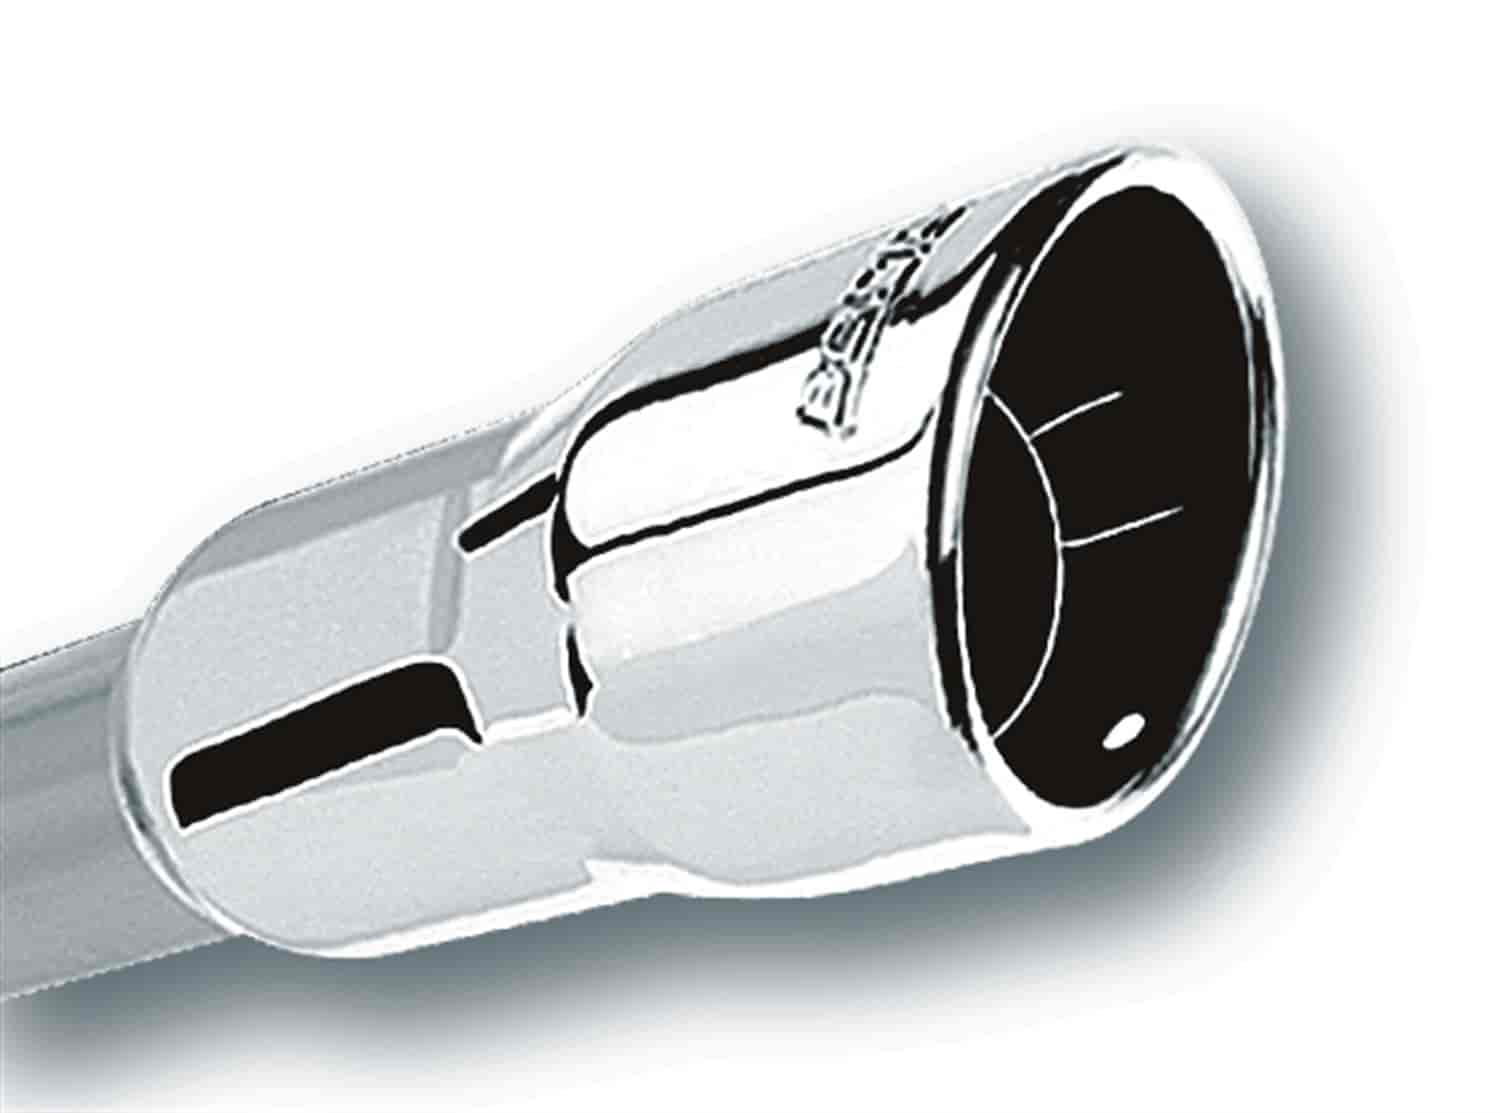 Stainless Steel Exhaust Tip Outlet Size: 4-1/4"